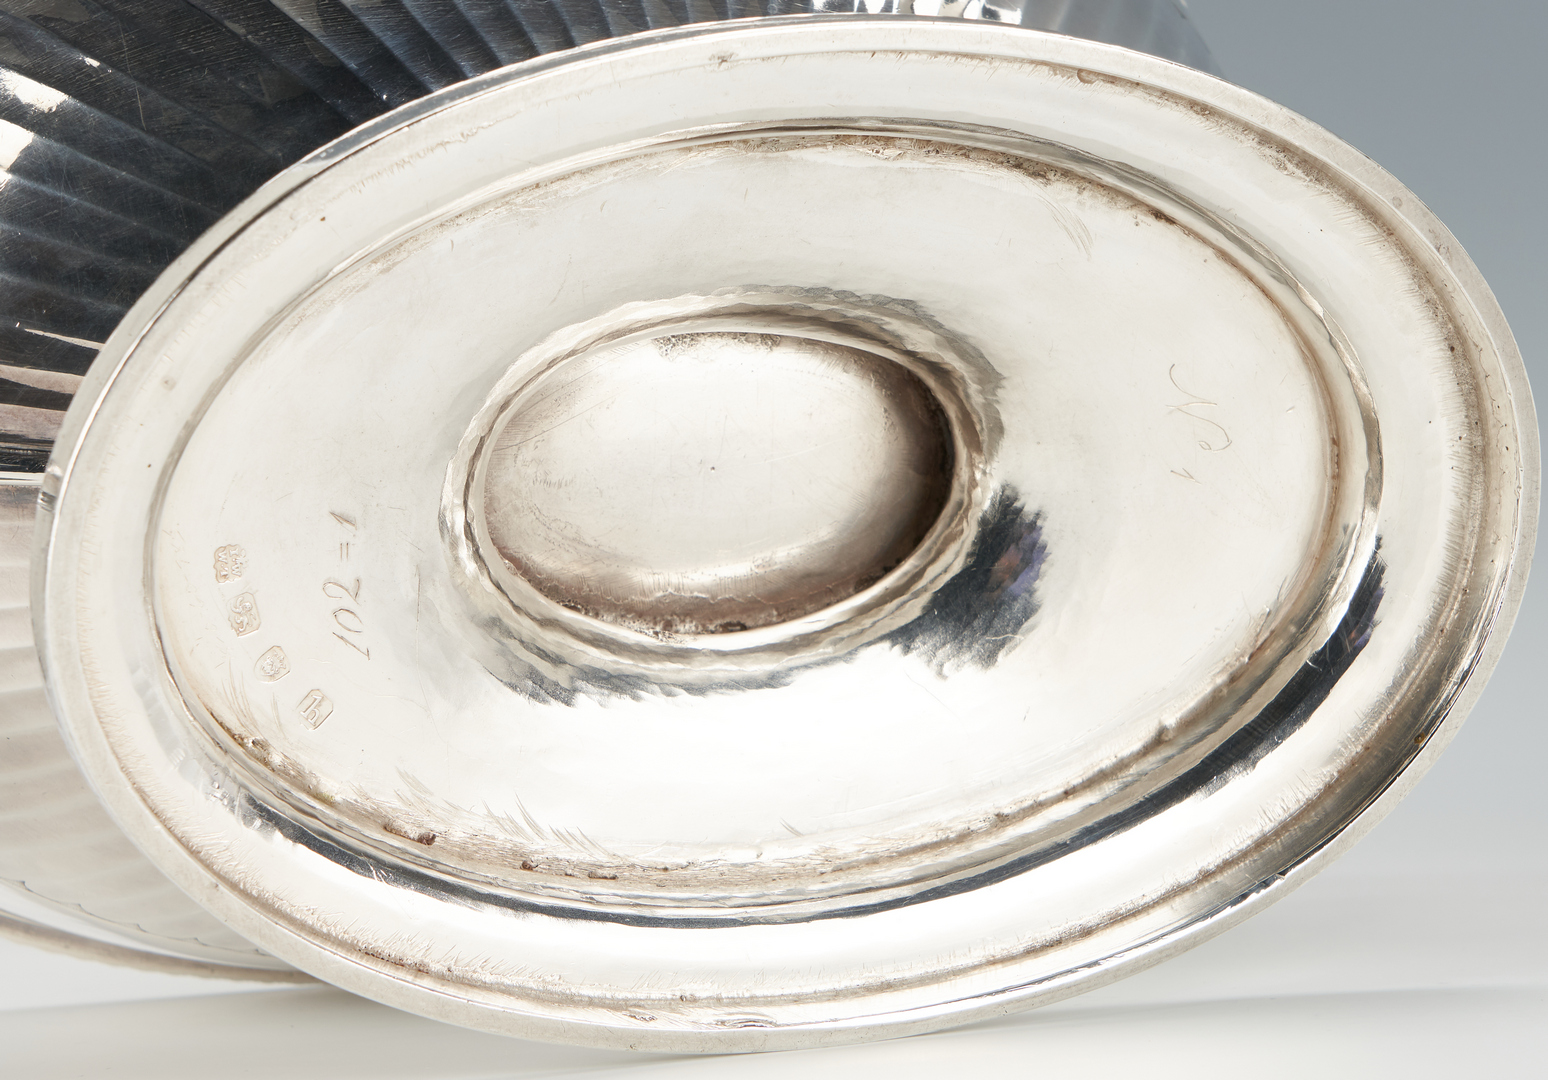 Lot 83: Large George III Armorial Sterling Tureen, Wakelin and Taylor